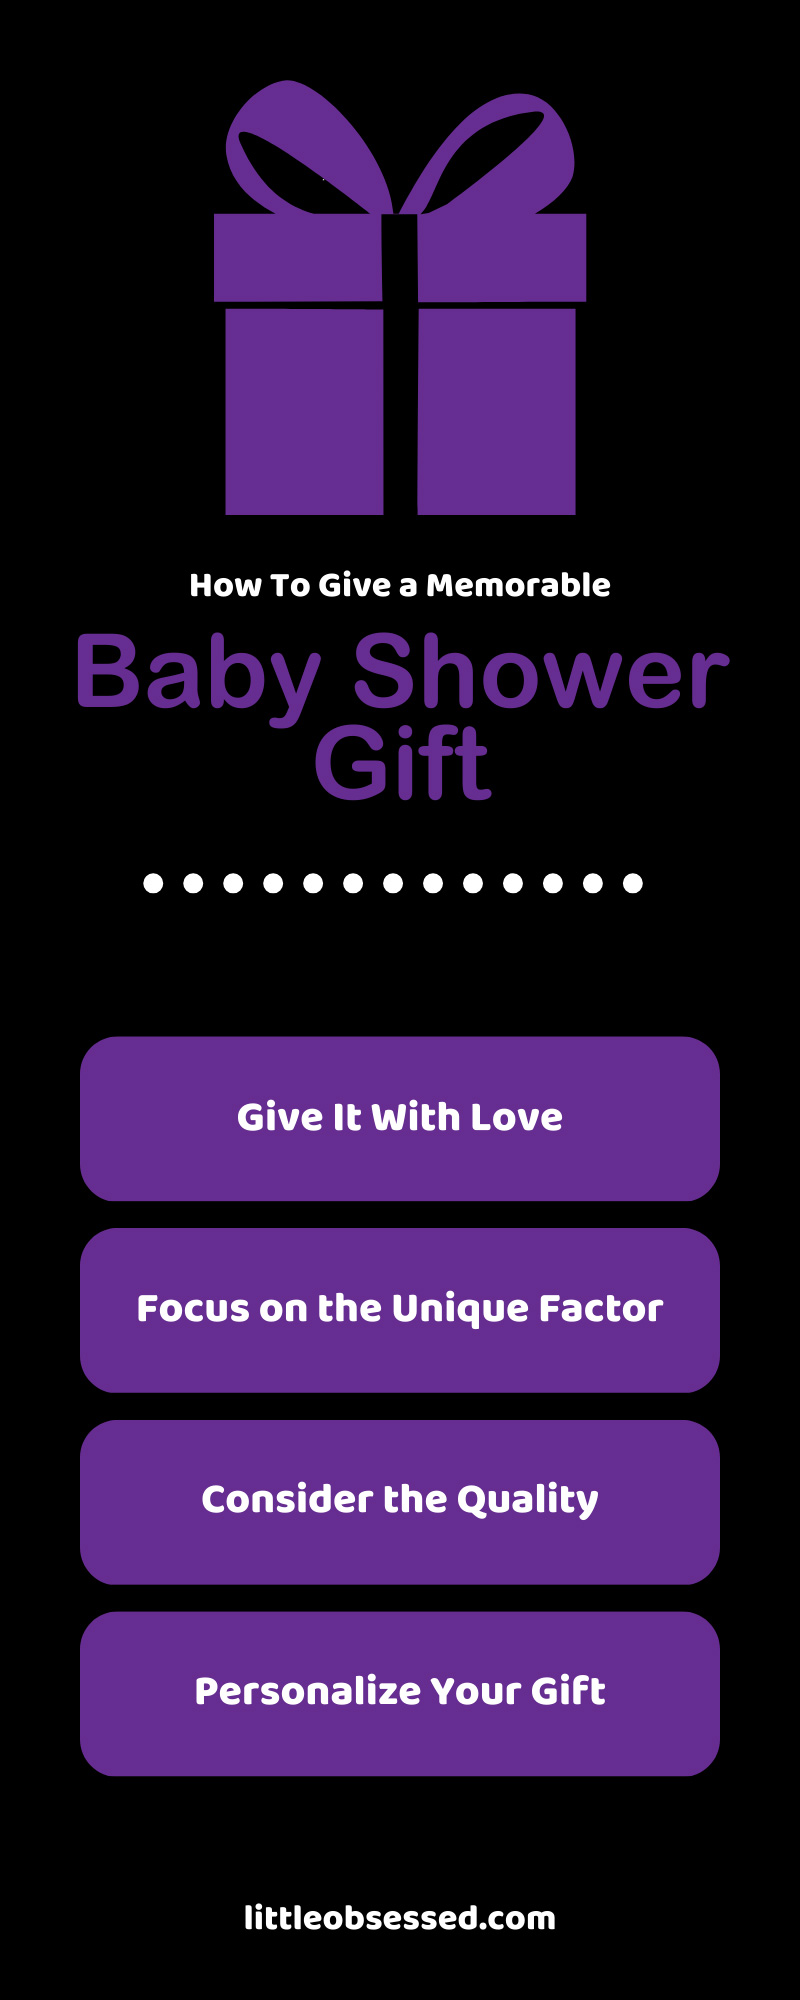 How To Give a Memorable Baby Shower Gift